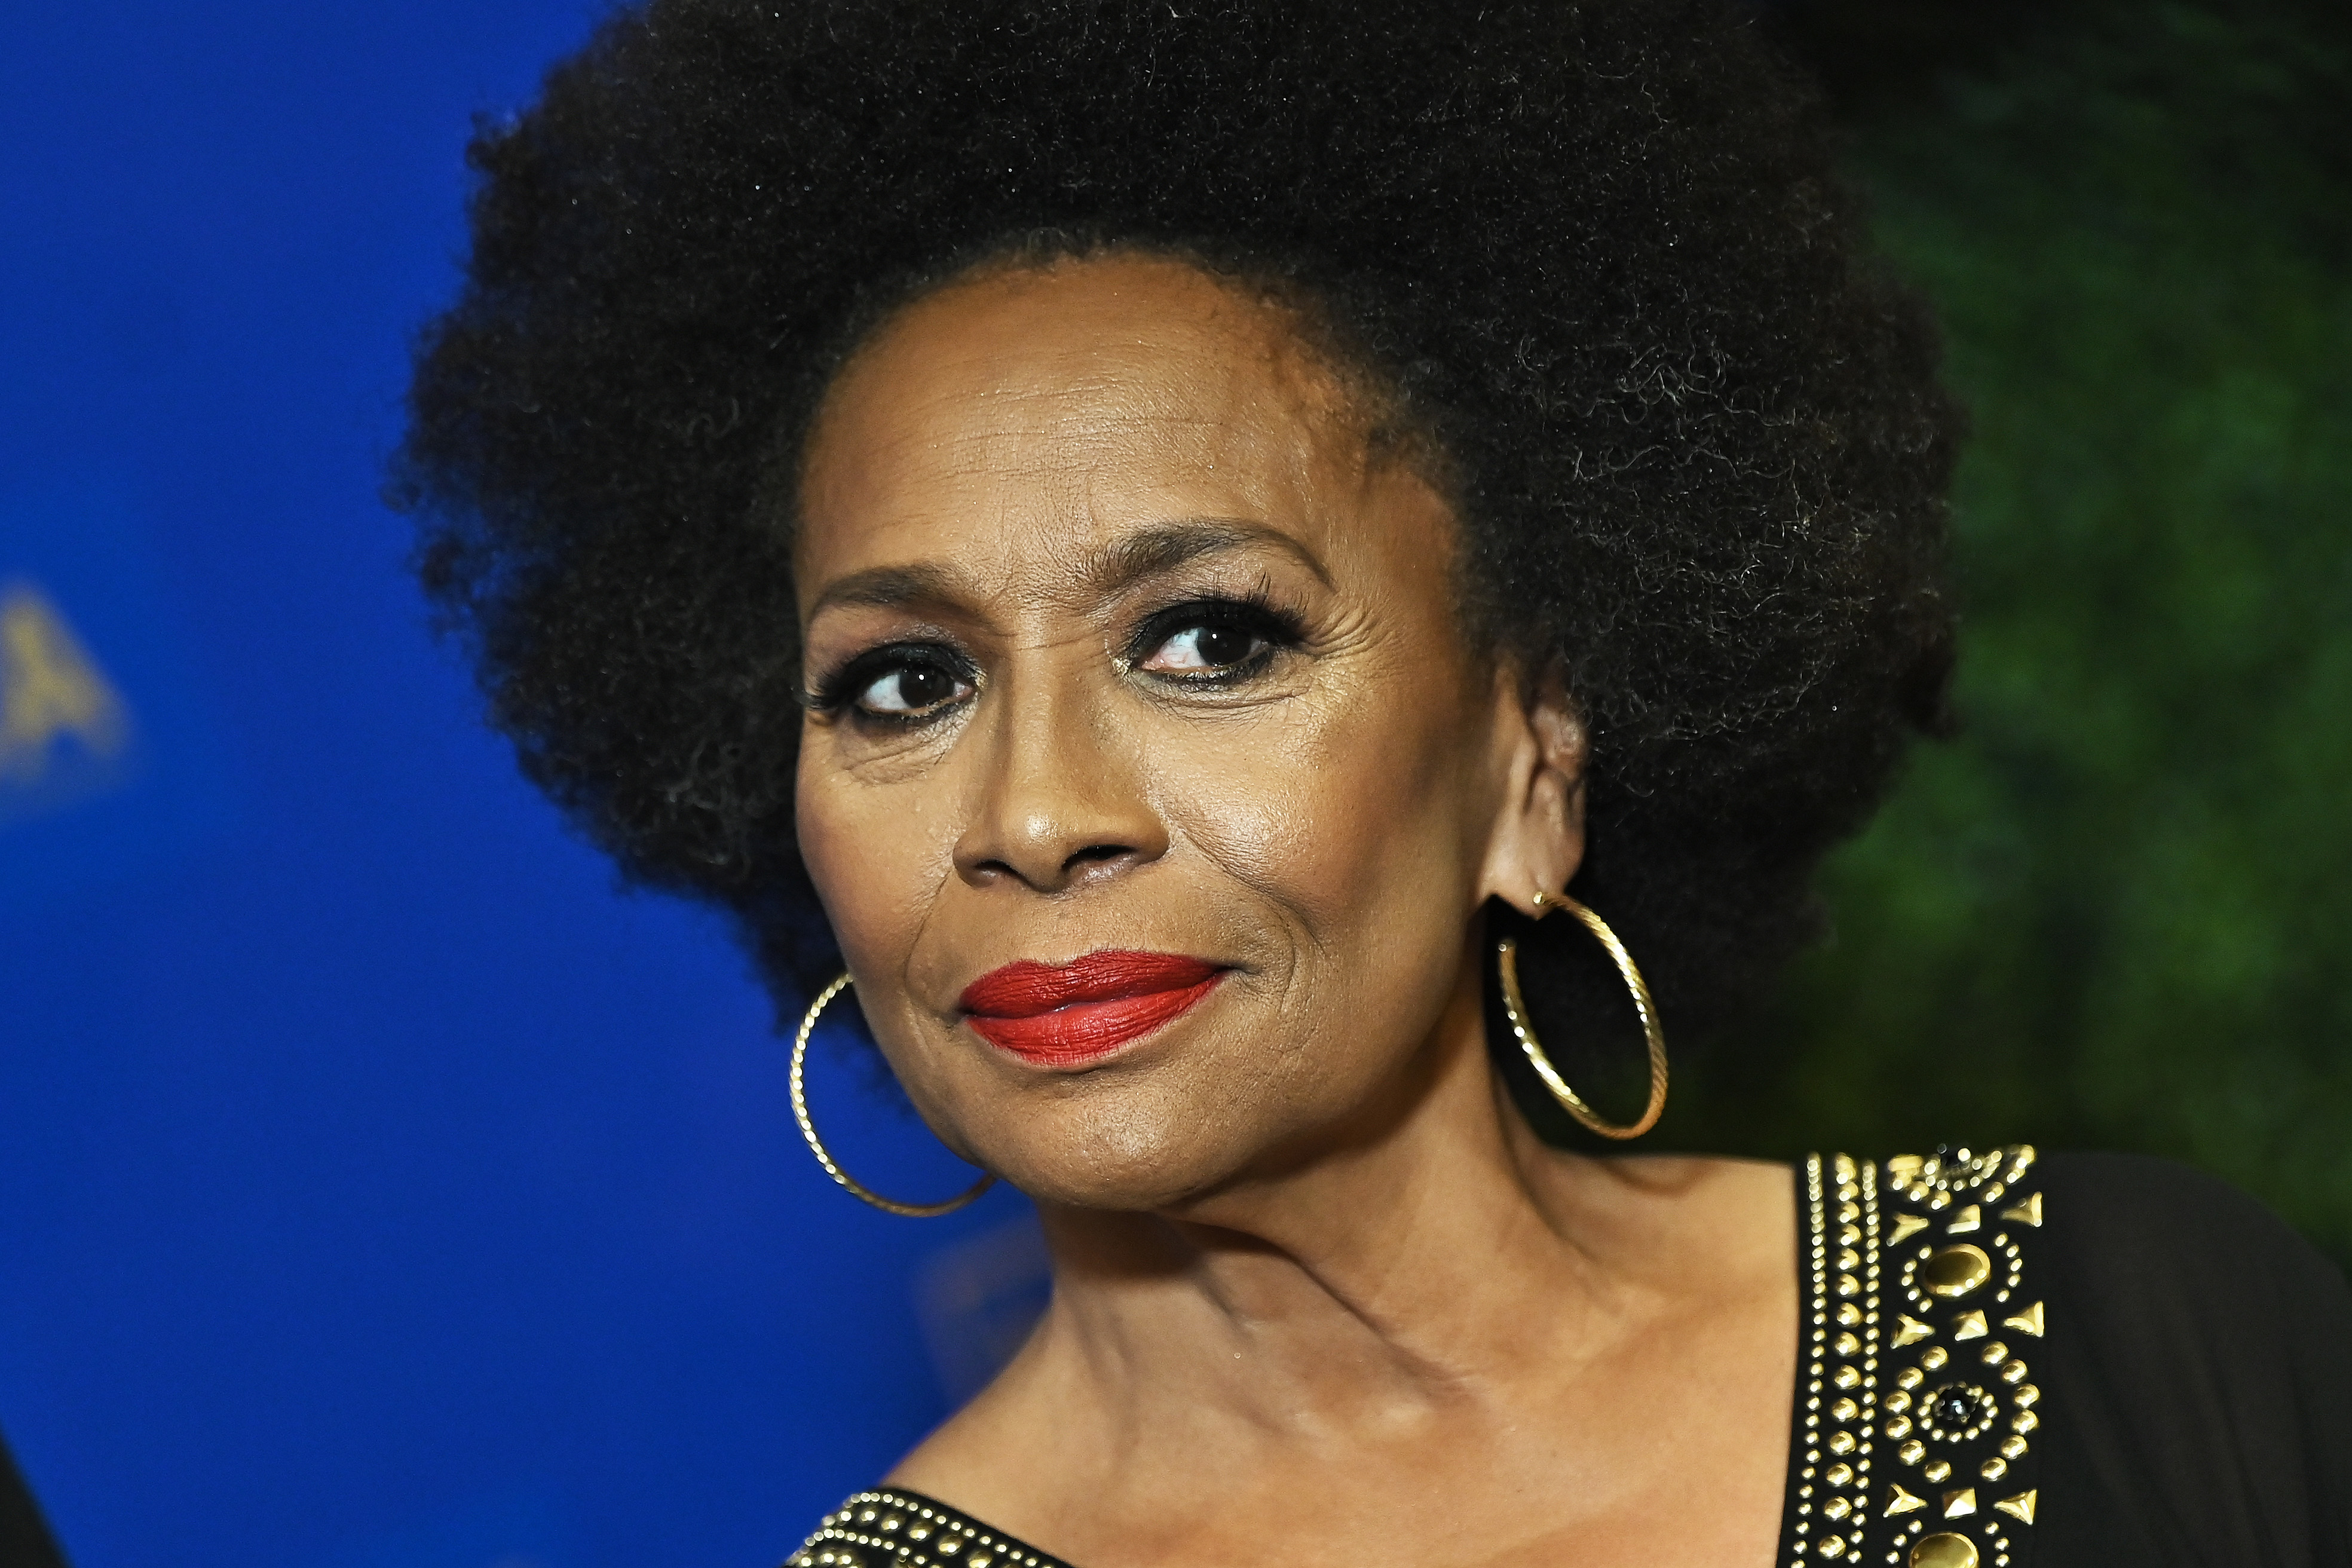 Close-up of Jenifer Lewis wearing hoop earrings and a black top with gold details